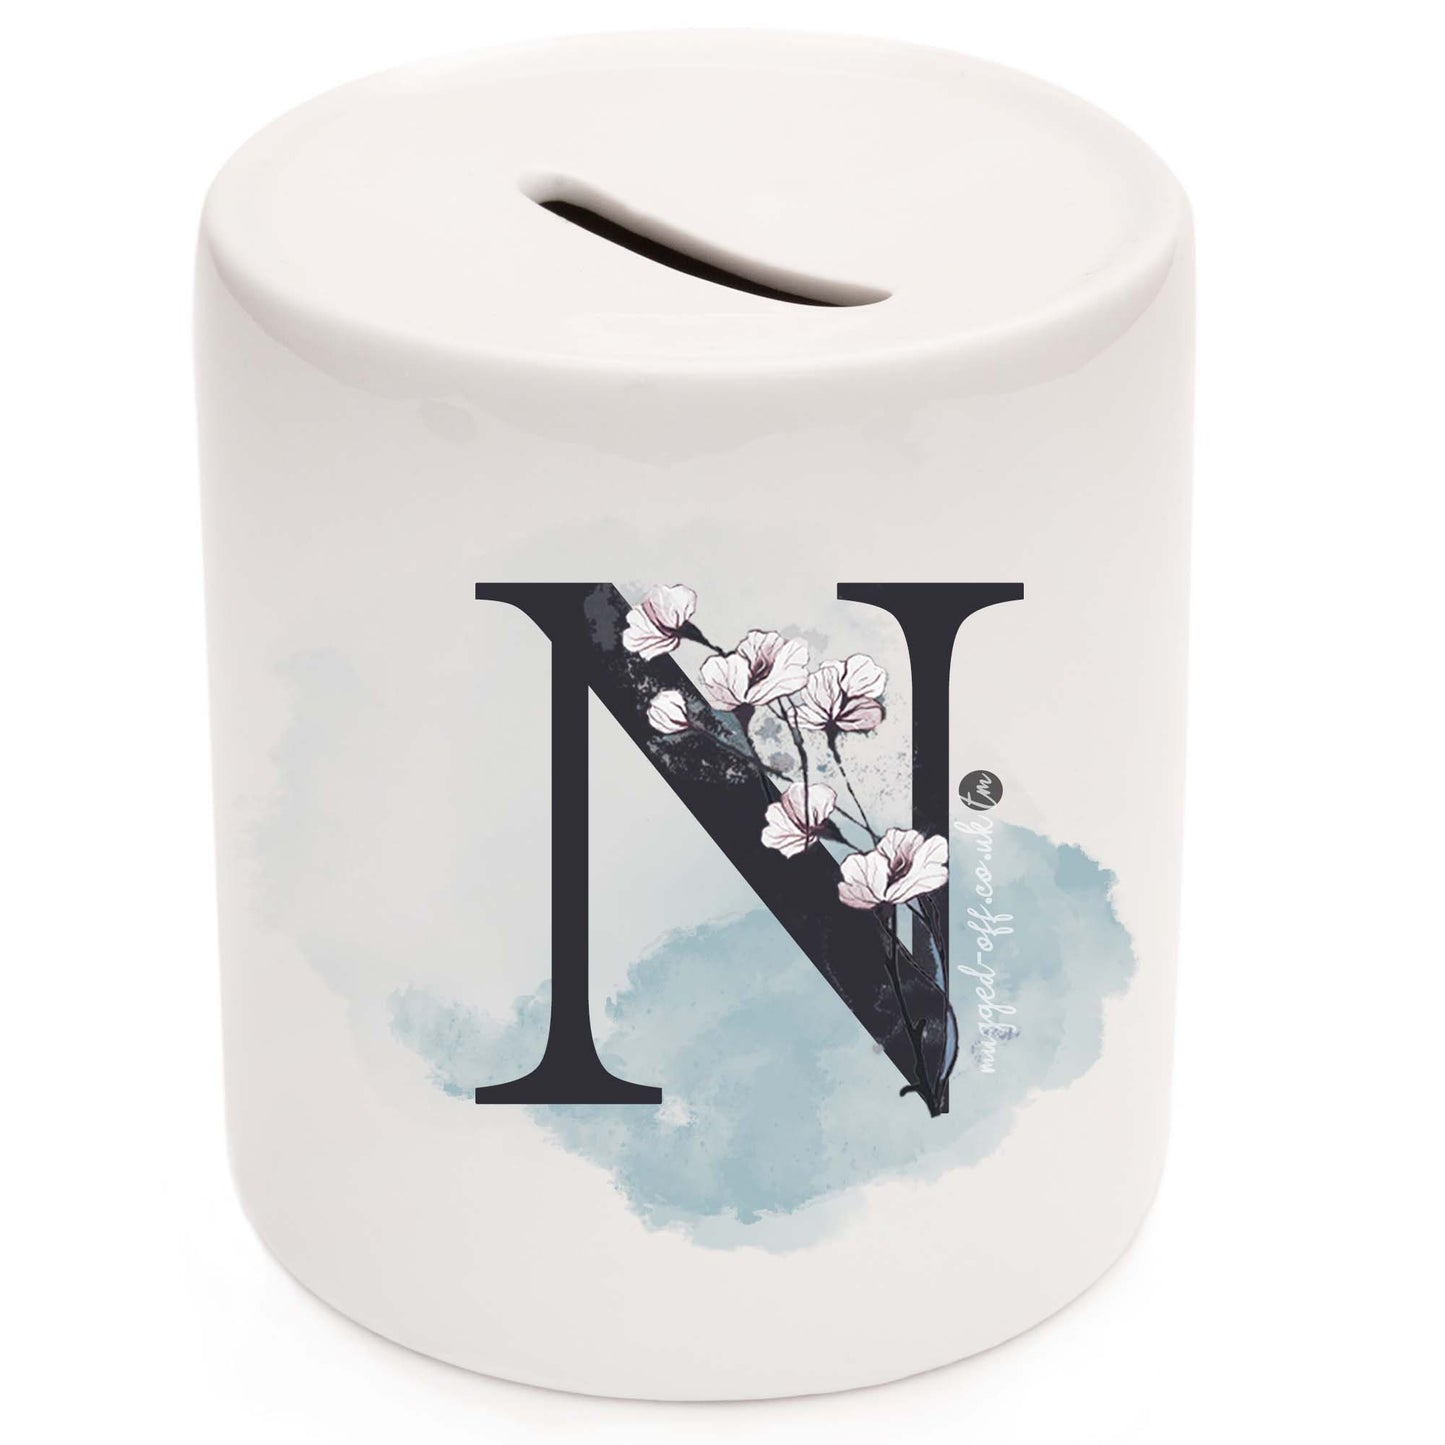 Initial Letter Personalised gift ceramic money box piggy bank Floral Initial Letter Christmas Birhtday Gifts